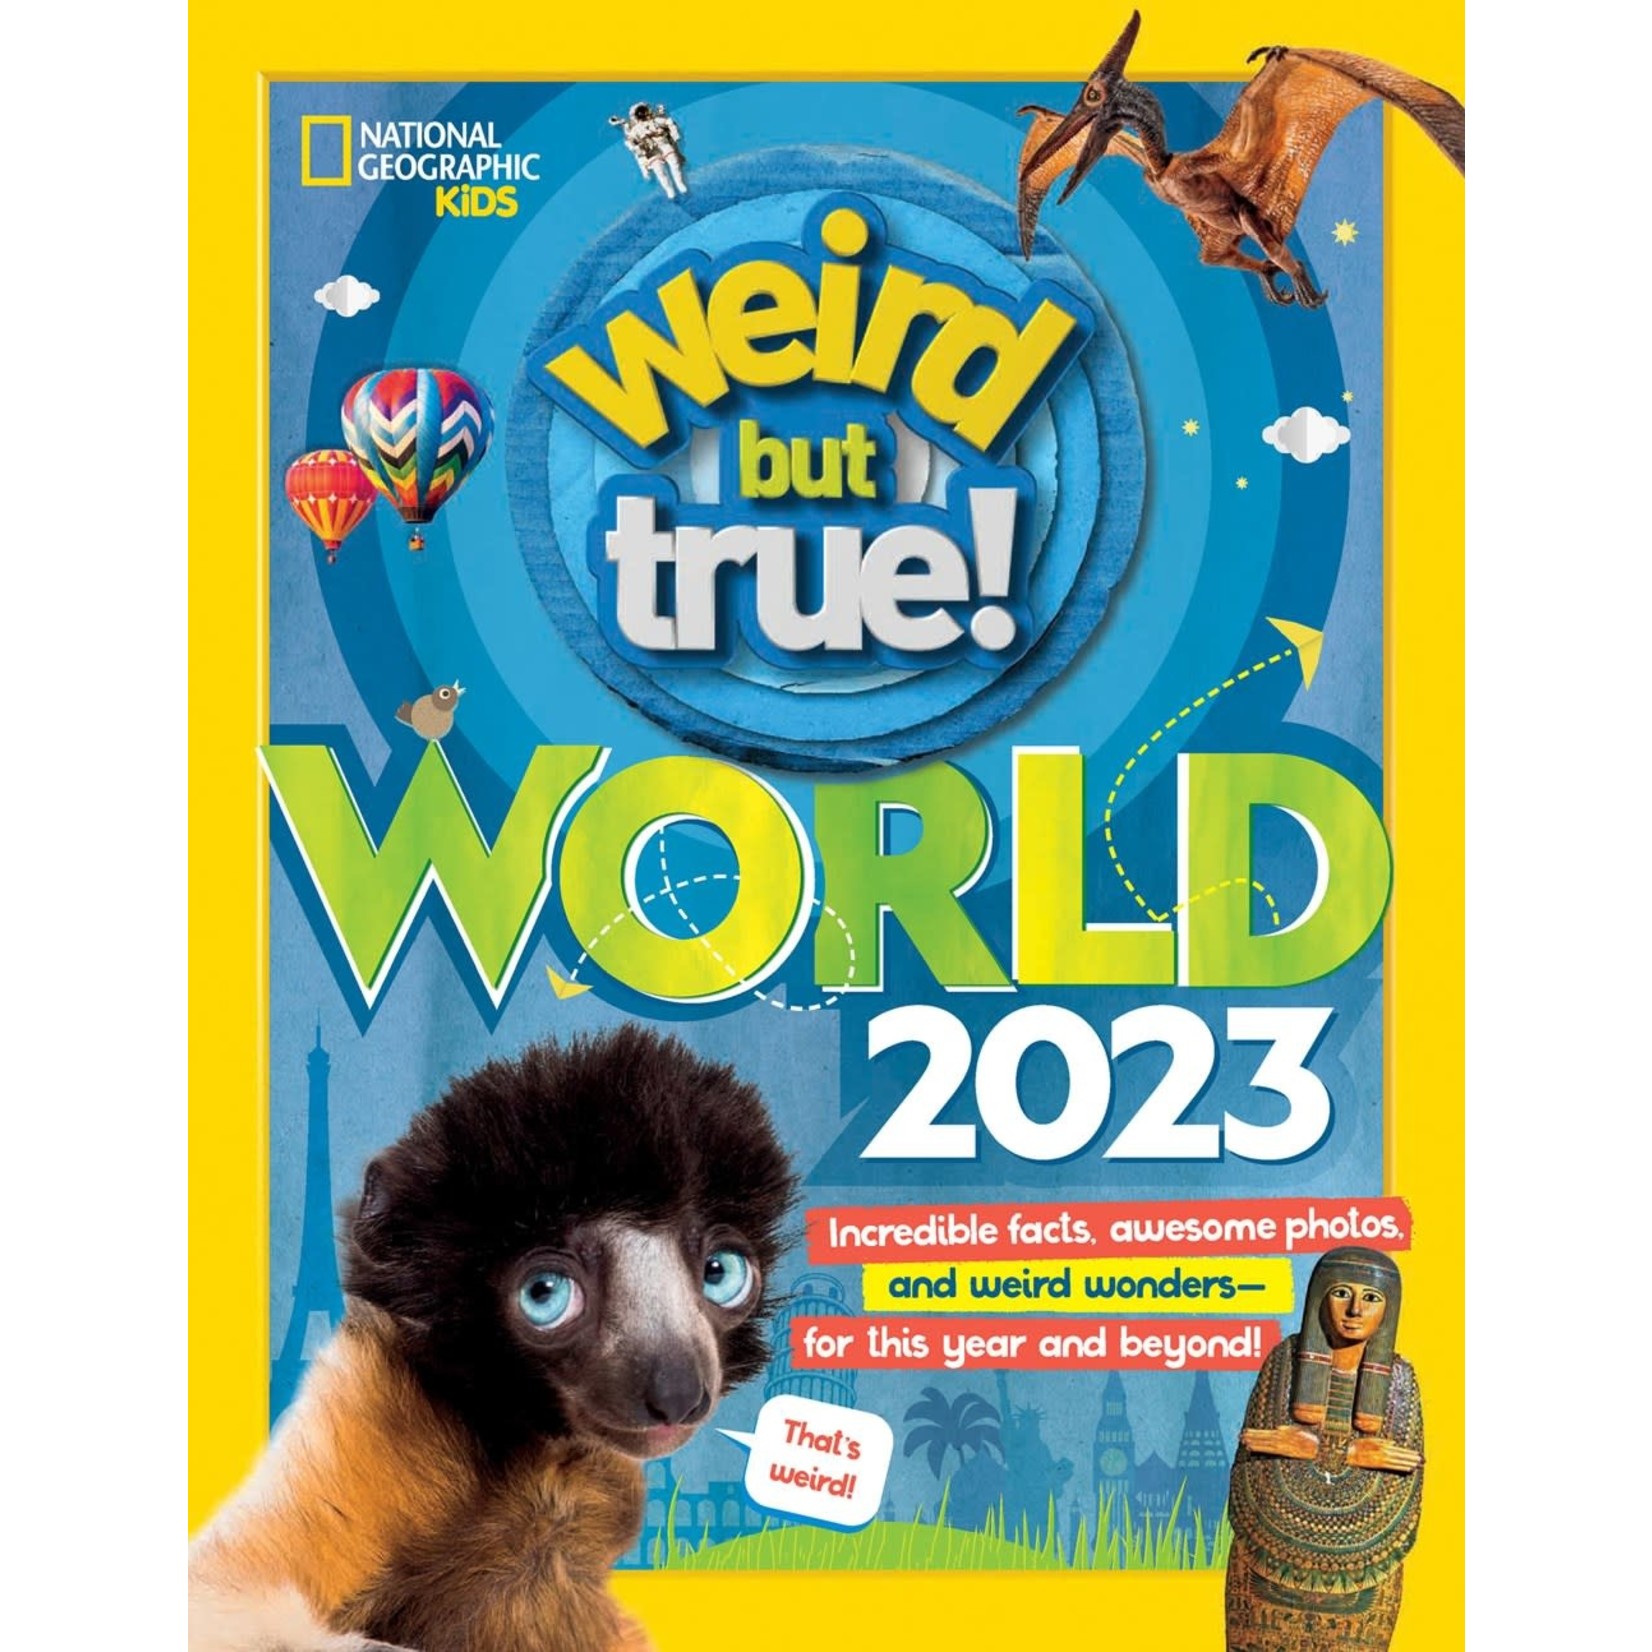 Weird But True World 2023: Incredible facts, awesome photos, and weird wonders—for THIS YEAR and beyond!